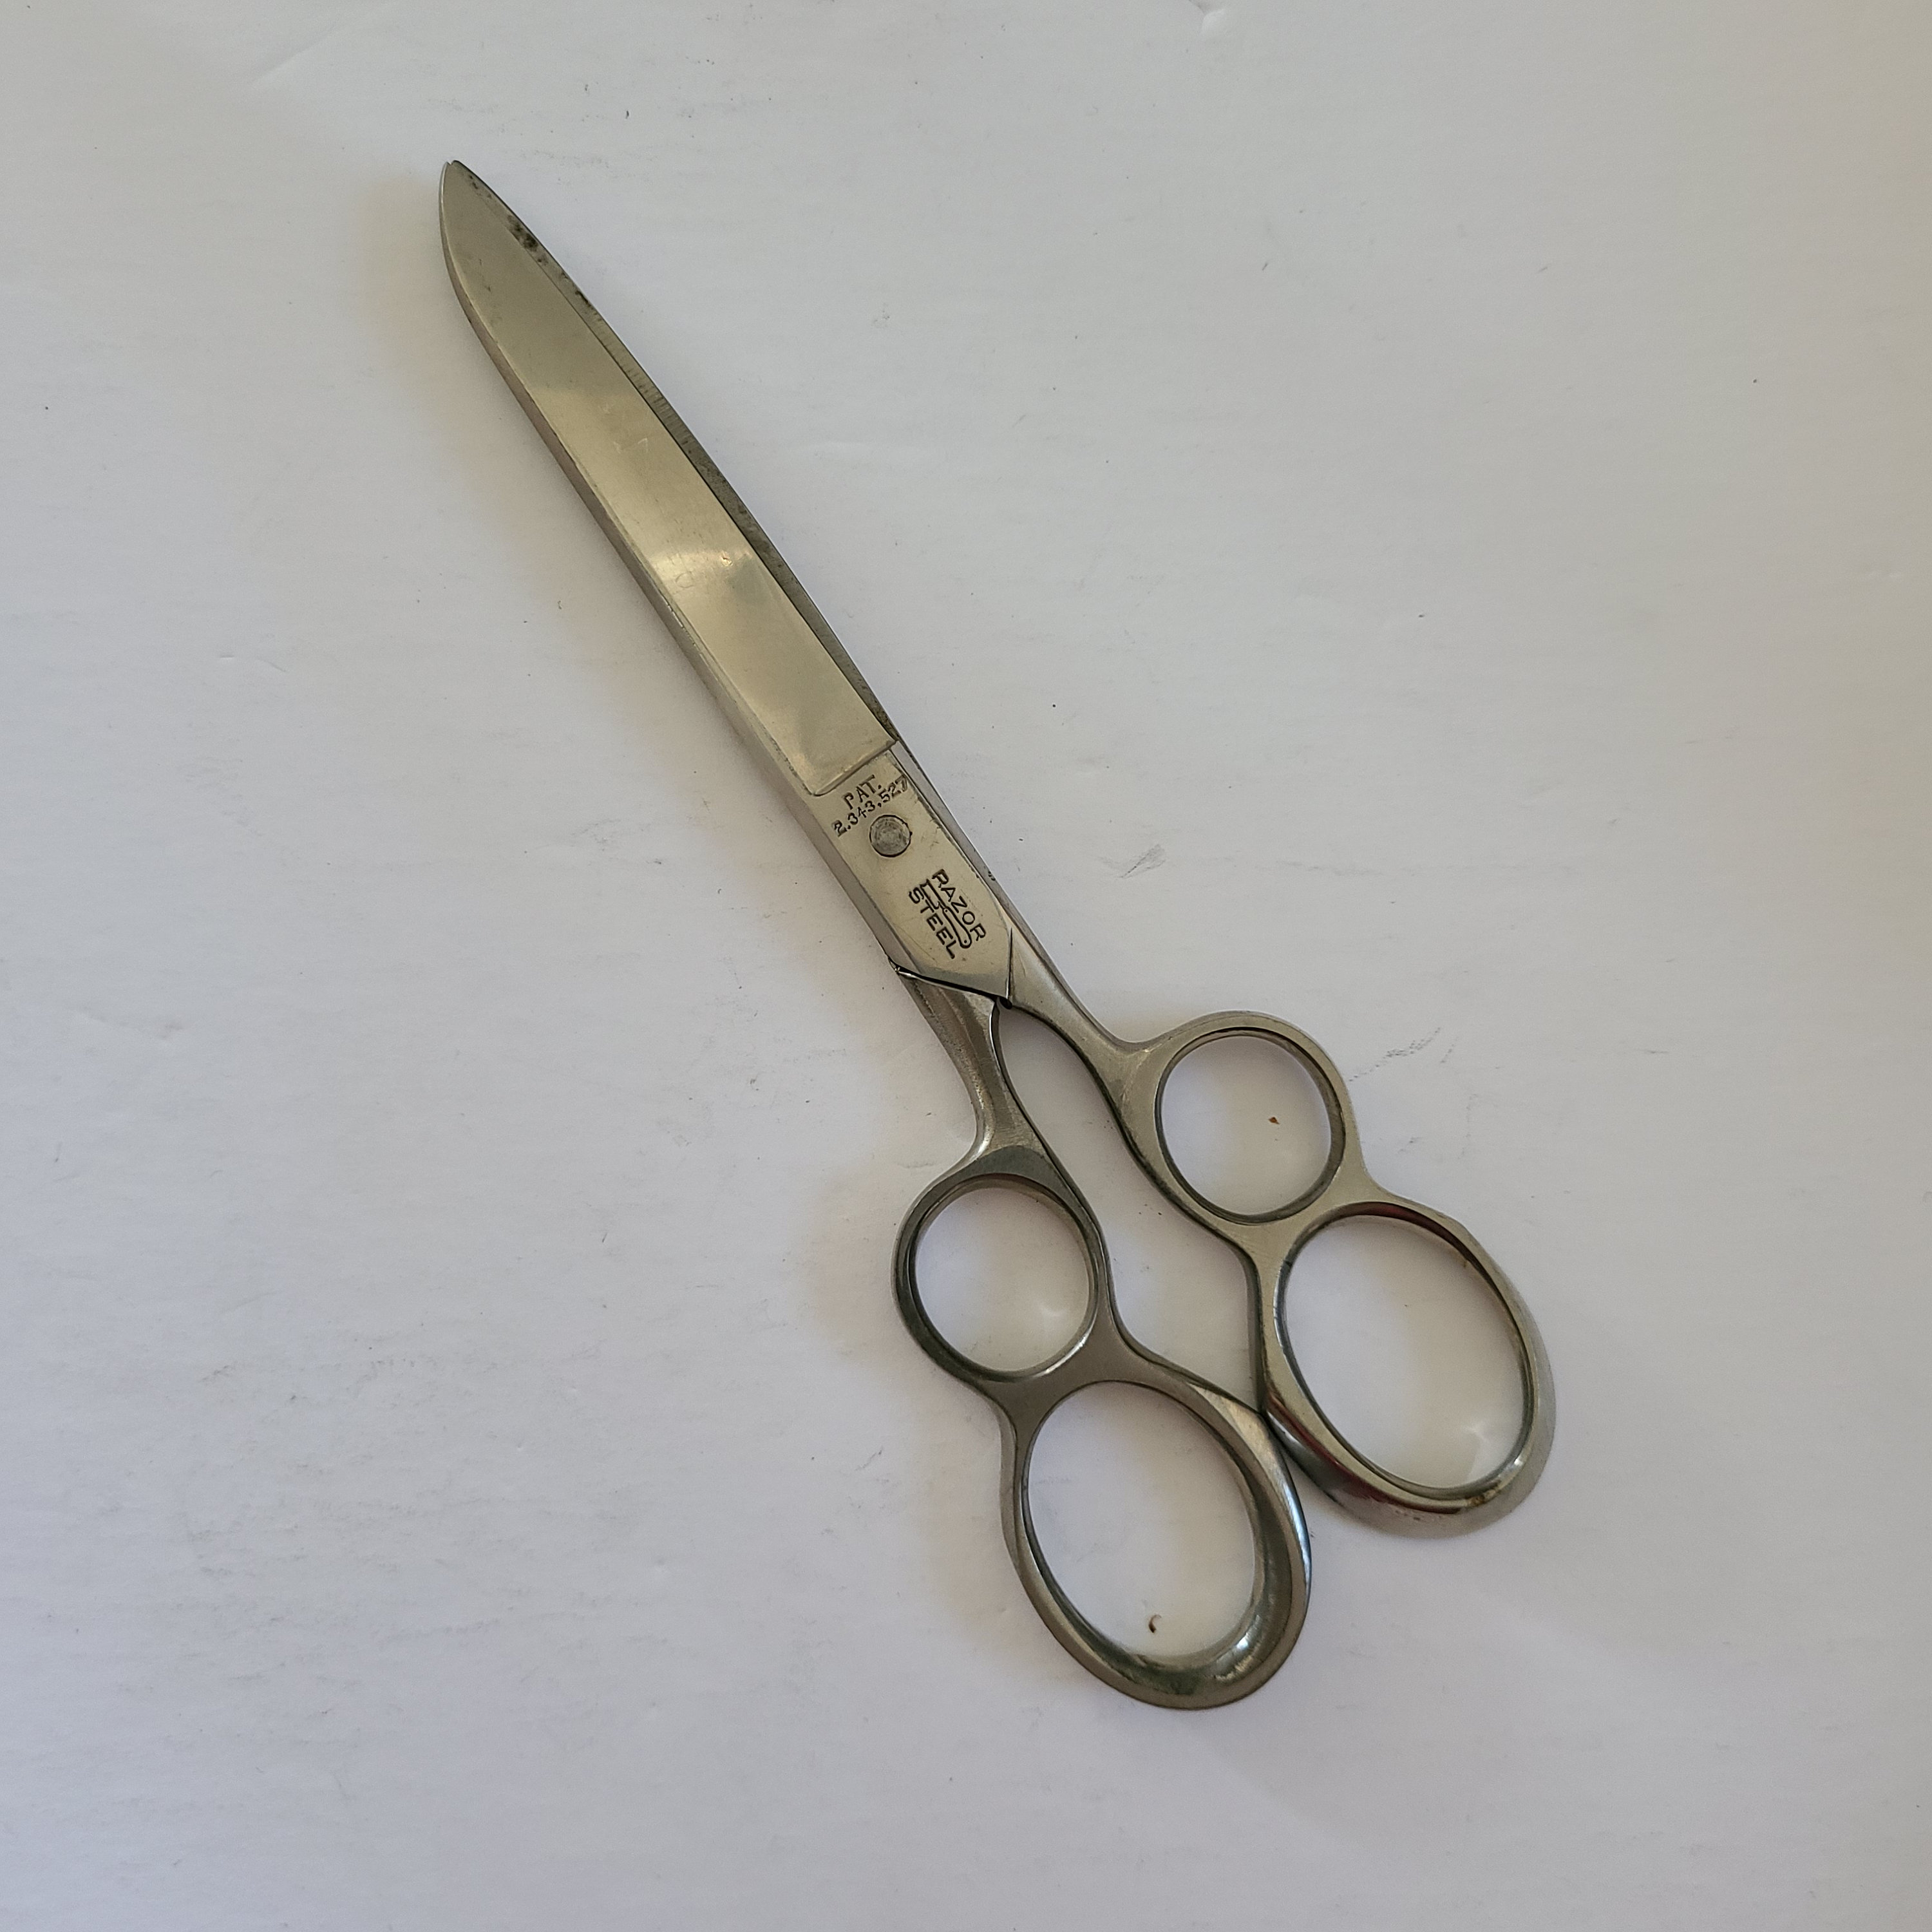 SINGER FOLDING SCISSORS. Chrome-plated Steel Scissors. Compact Design. Tips  Protected When Folded. Great for Your Traveling Craft Bag. 151 